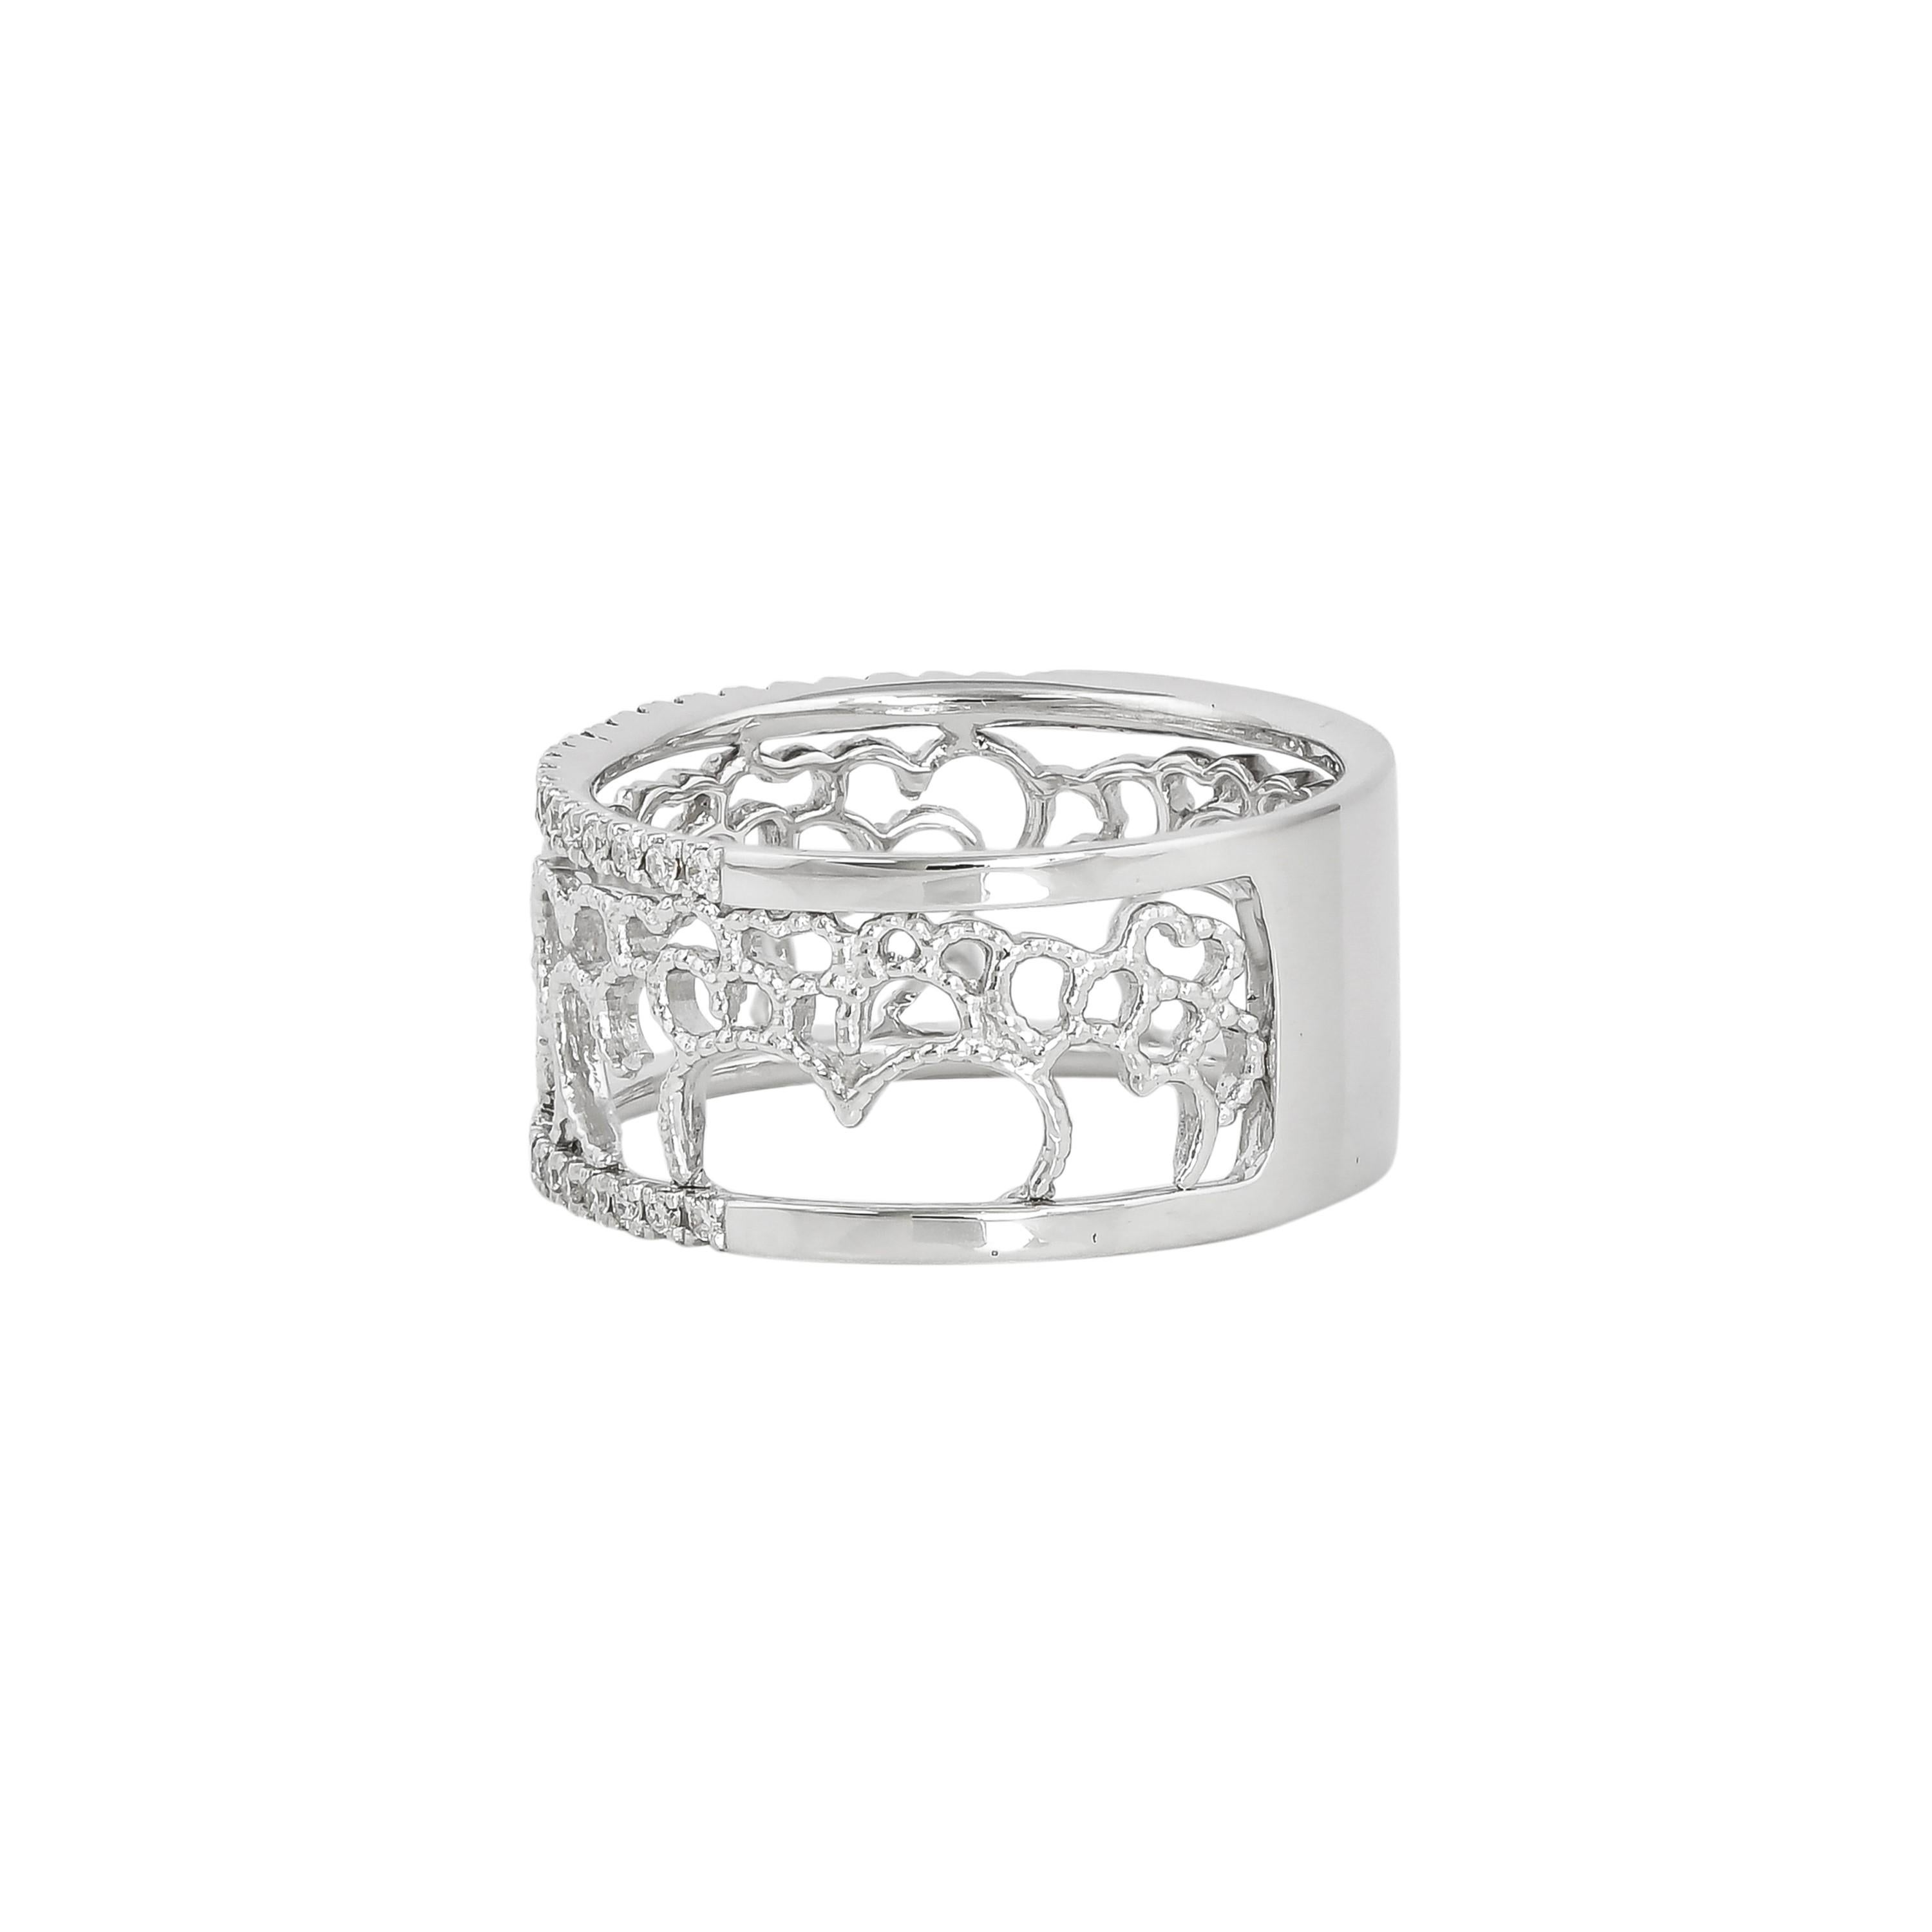 Contemporary 0.175 Carat Diamond Ring in 18 Karat White Gold For Sale